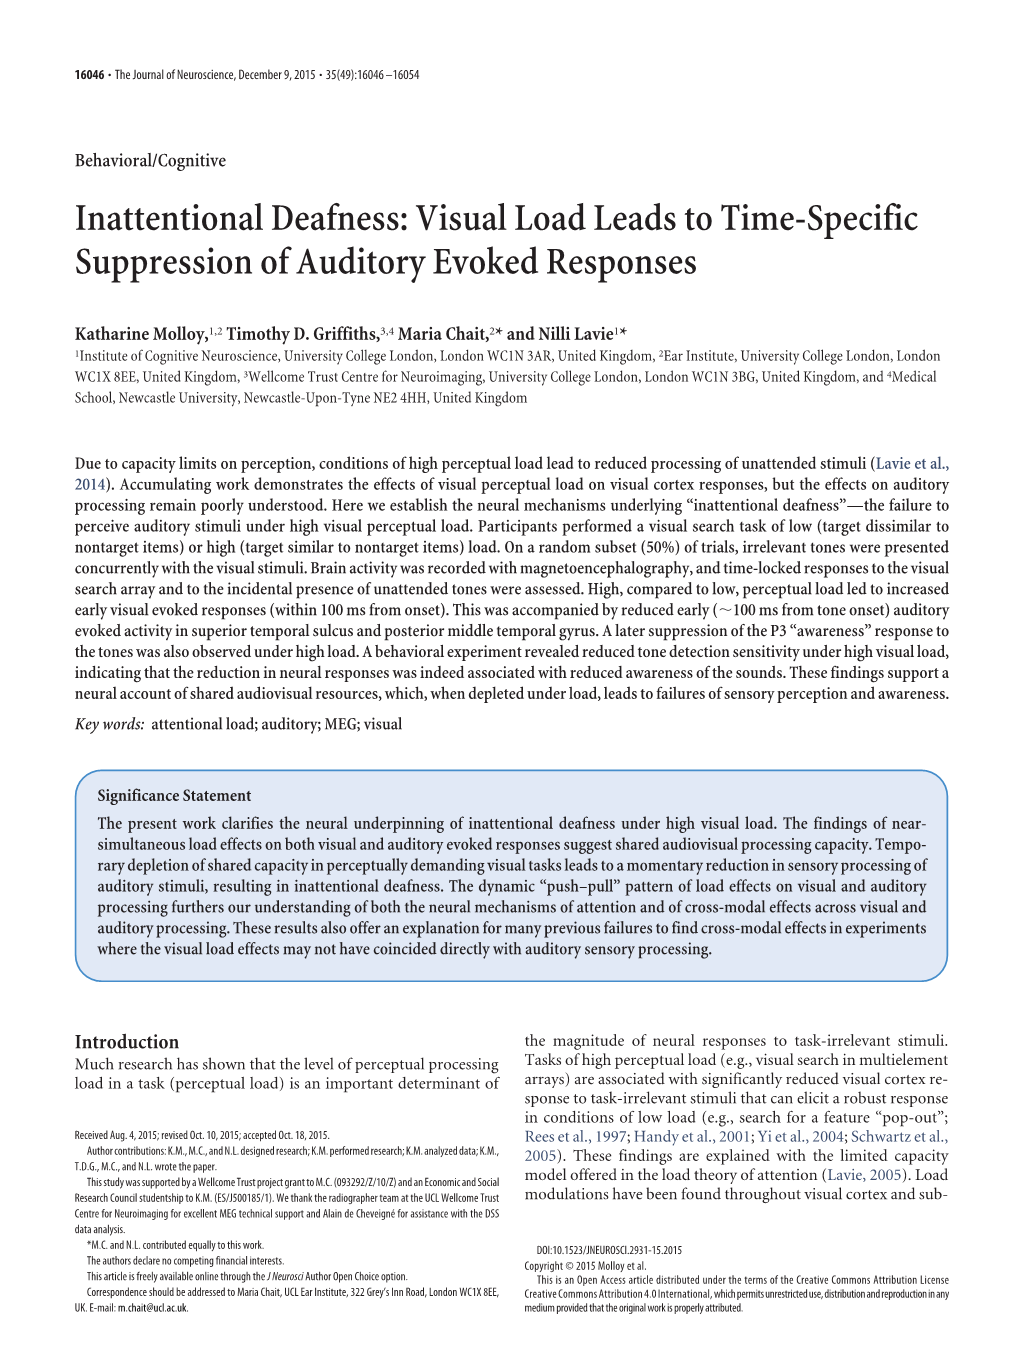 Visual Load Leads to Time-Specific Suppression of Auditory Evoked Responses